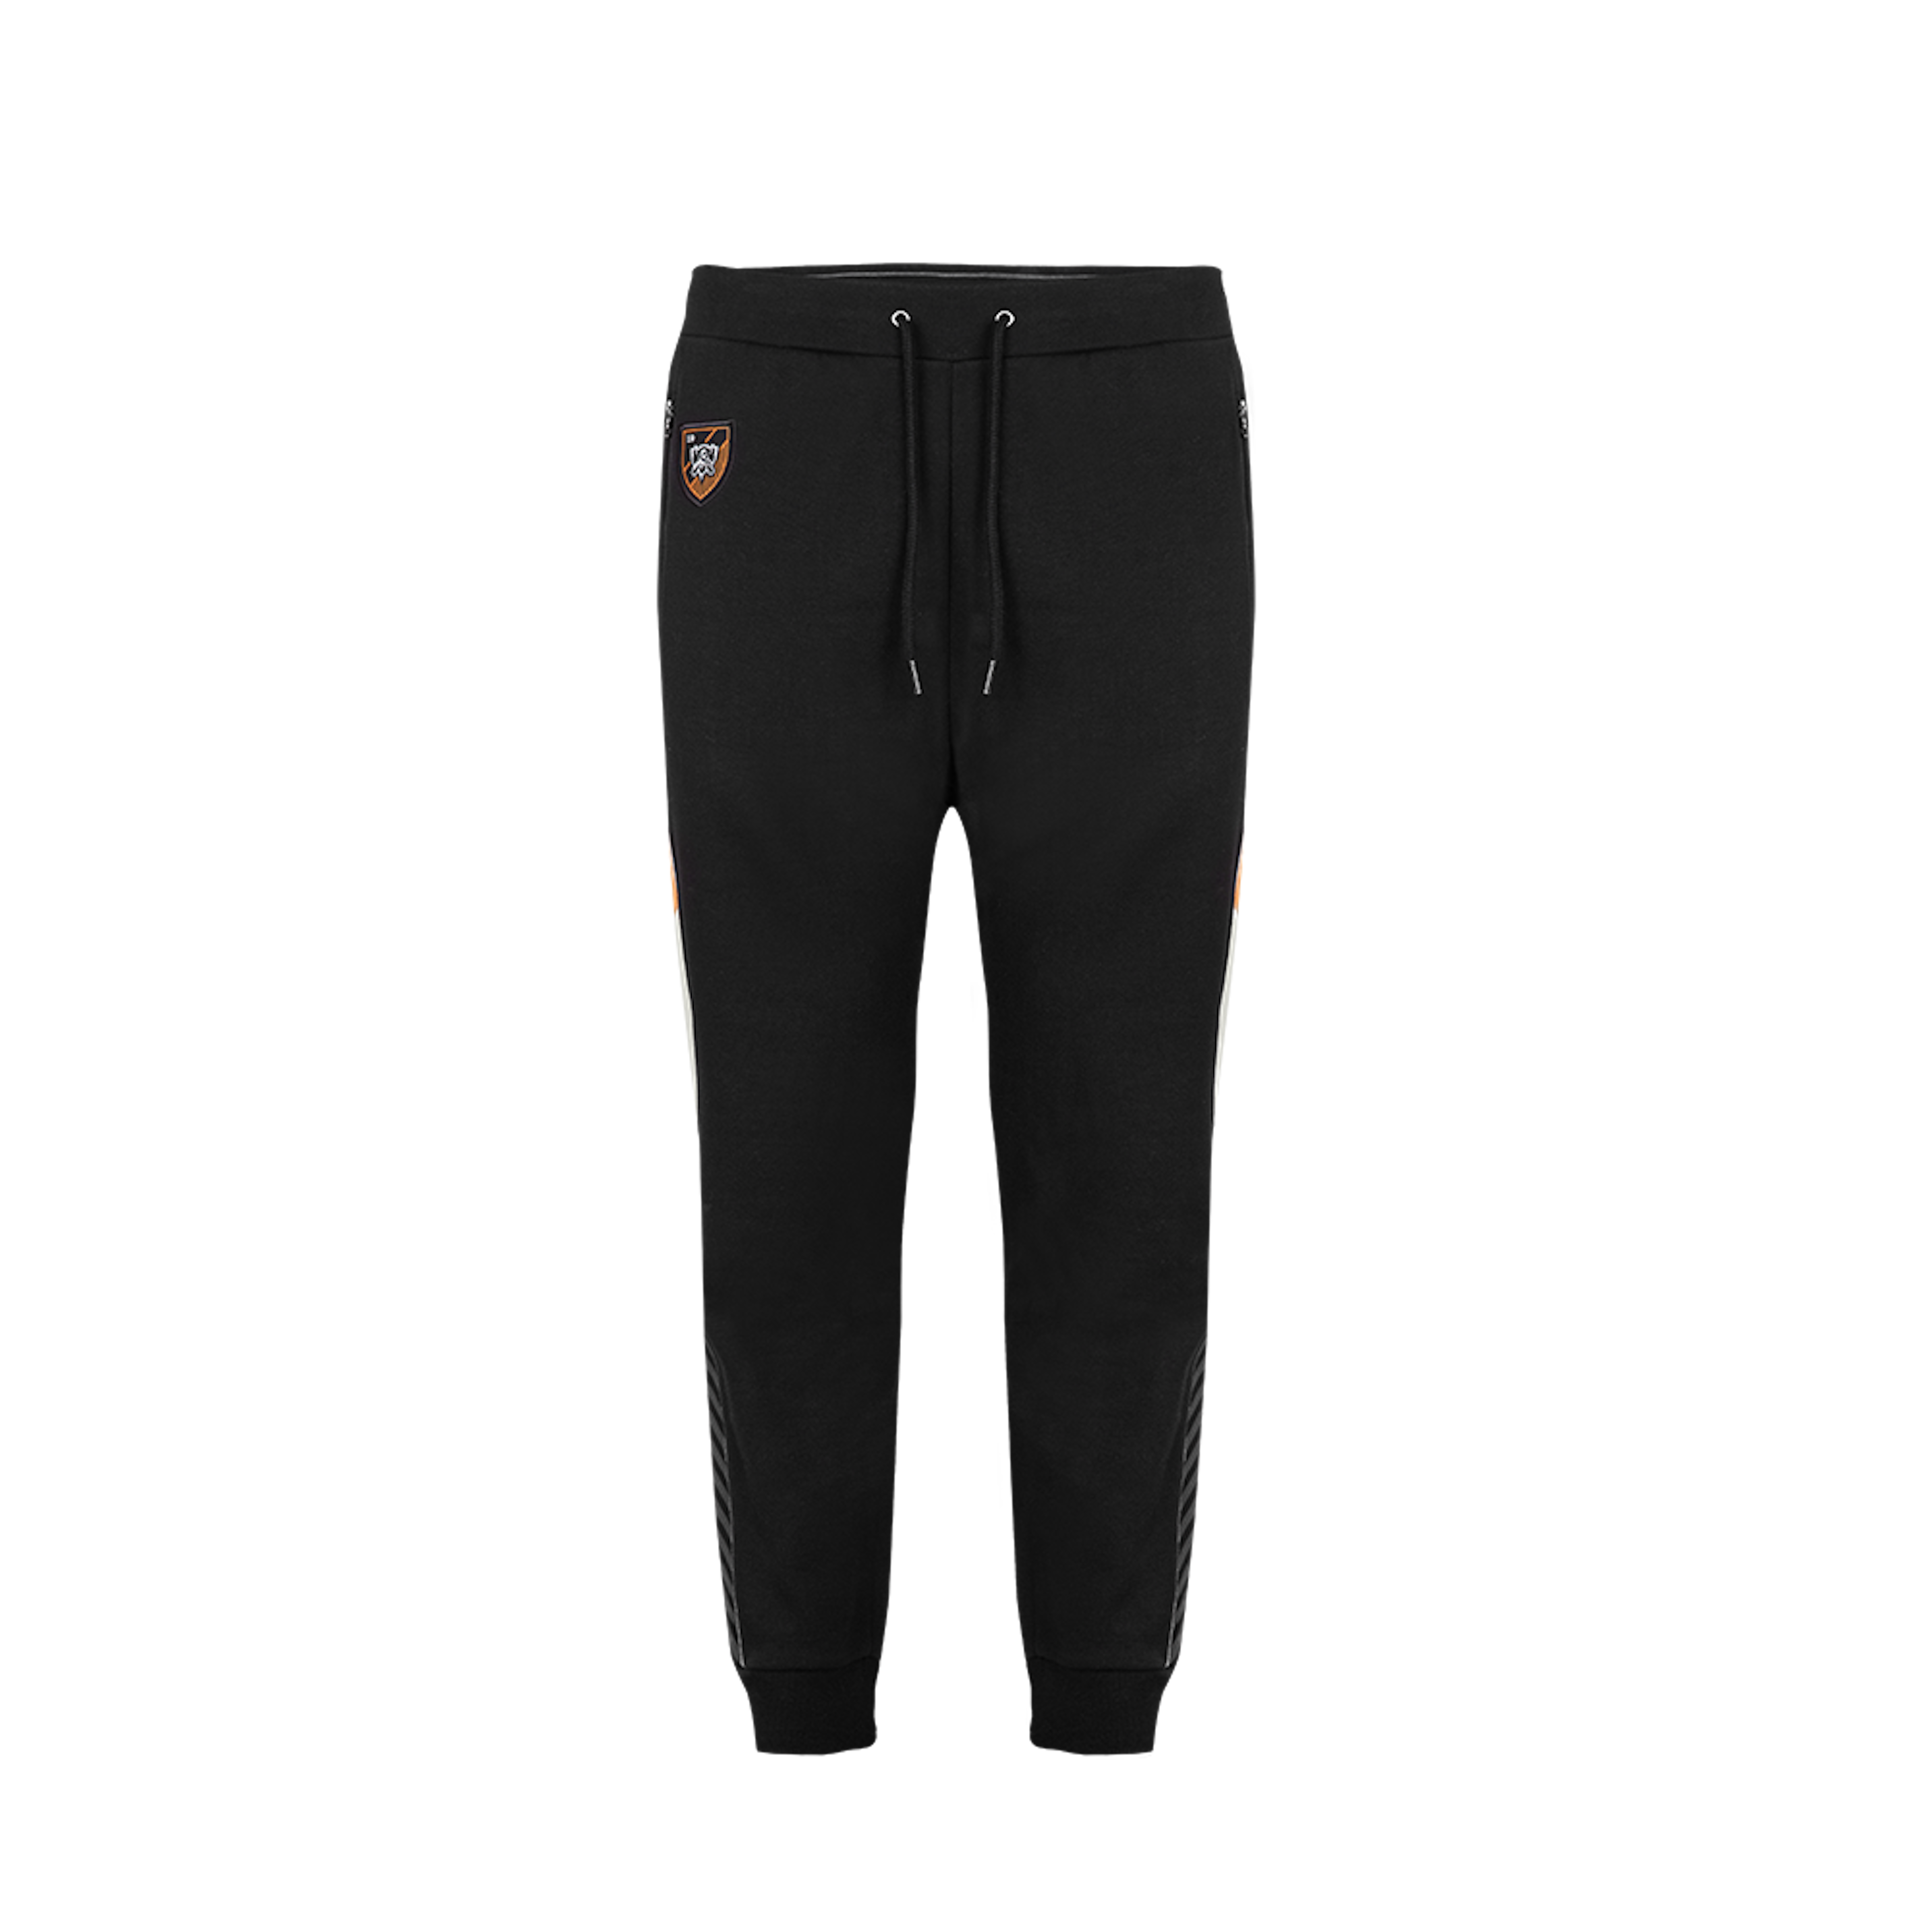 Worlds 2019 Joggers